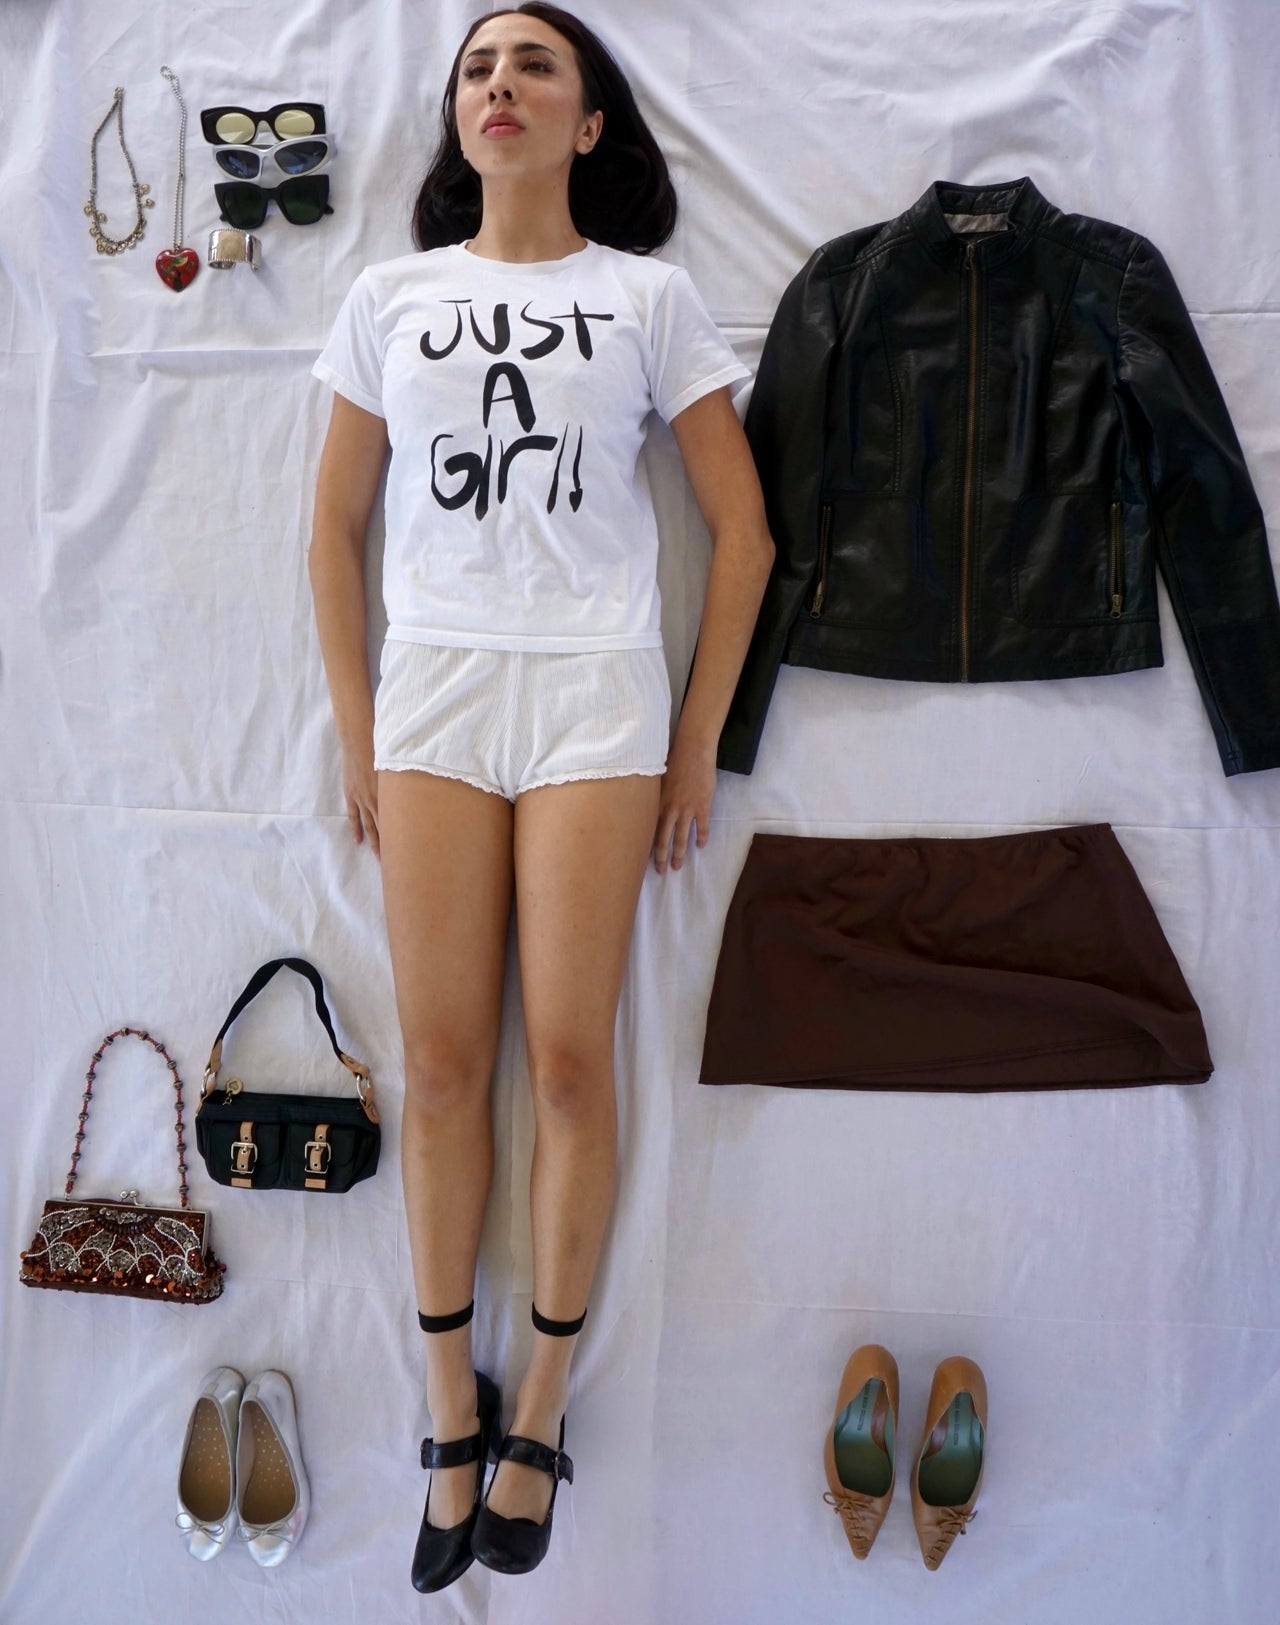 Just A Girl! two sided tee